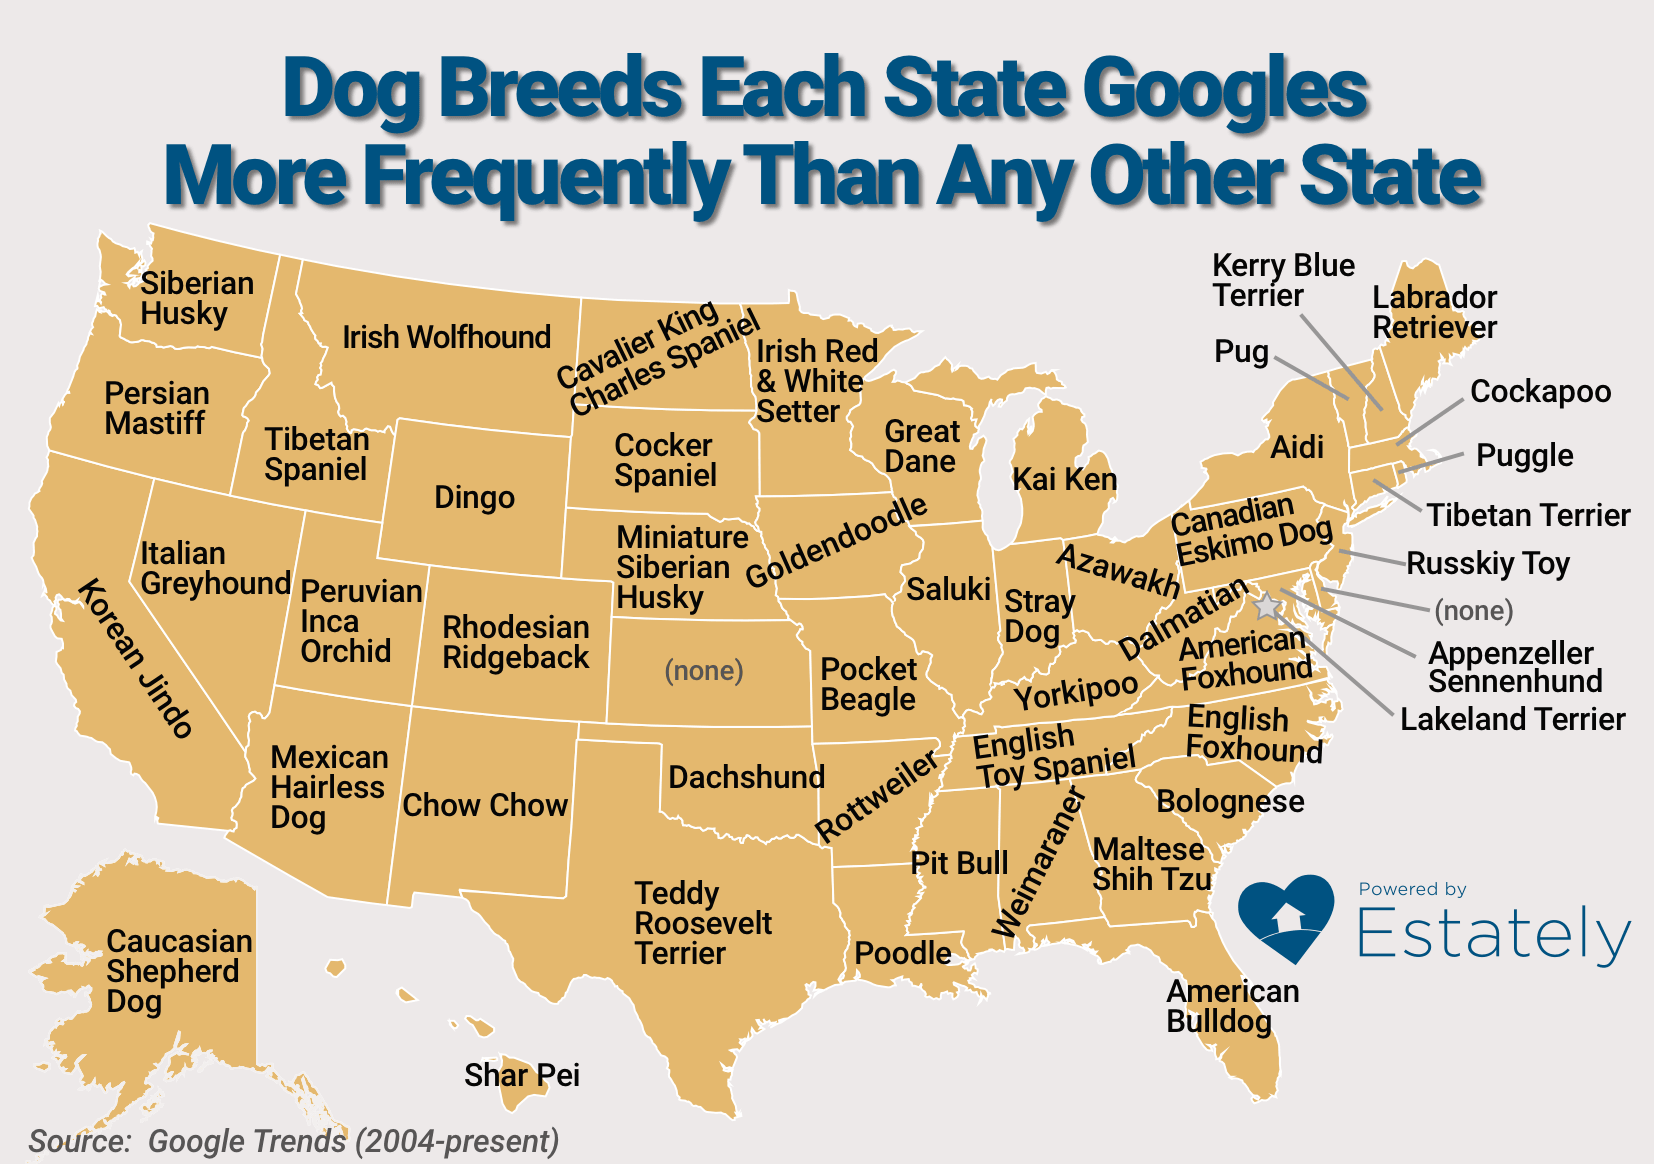 These Are the Dog Breeds Each State Googles More Frequently than Any